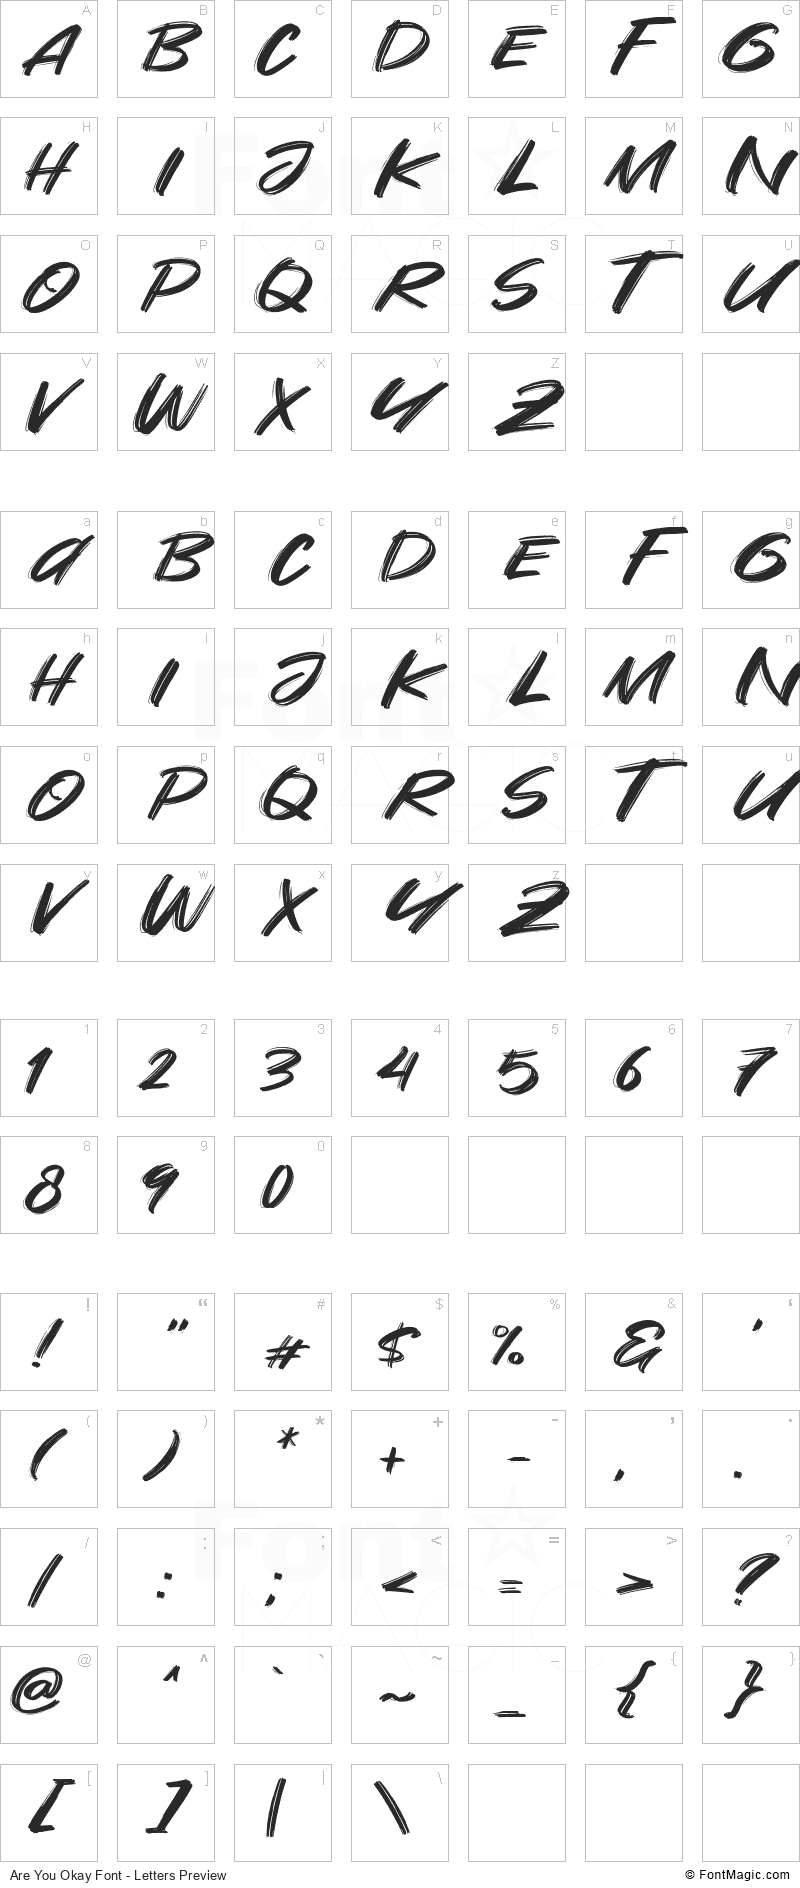 Are You Okay Font - All Latters Preview Chart